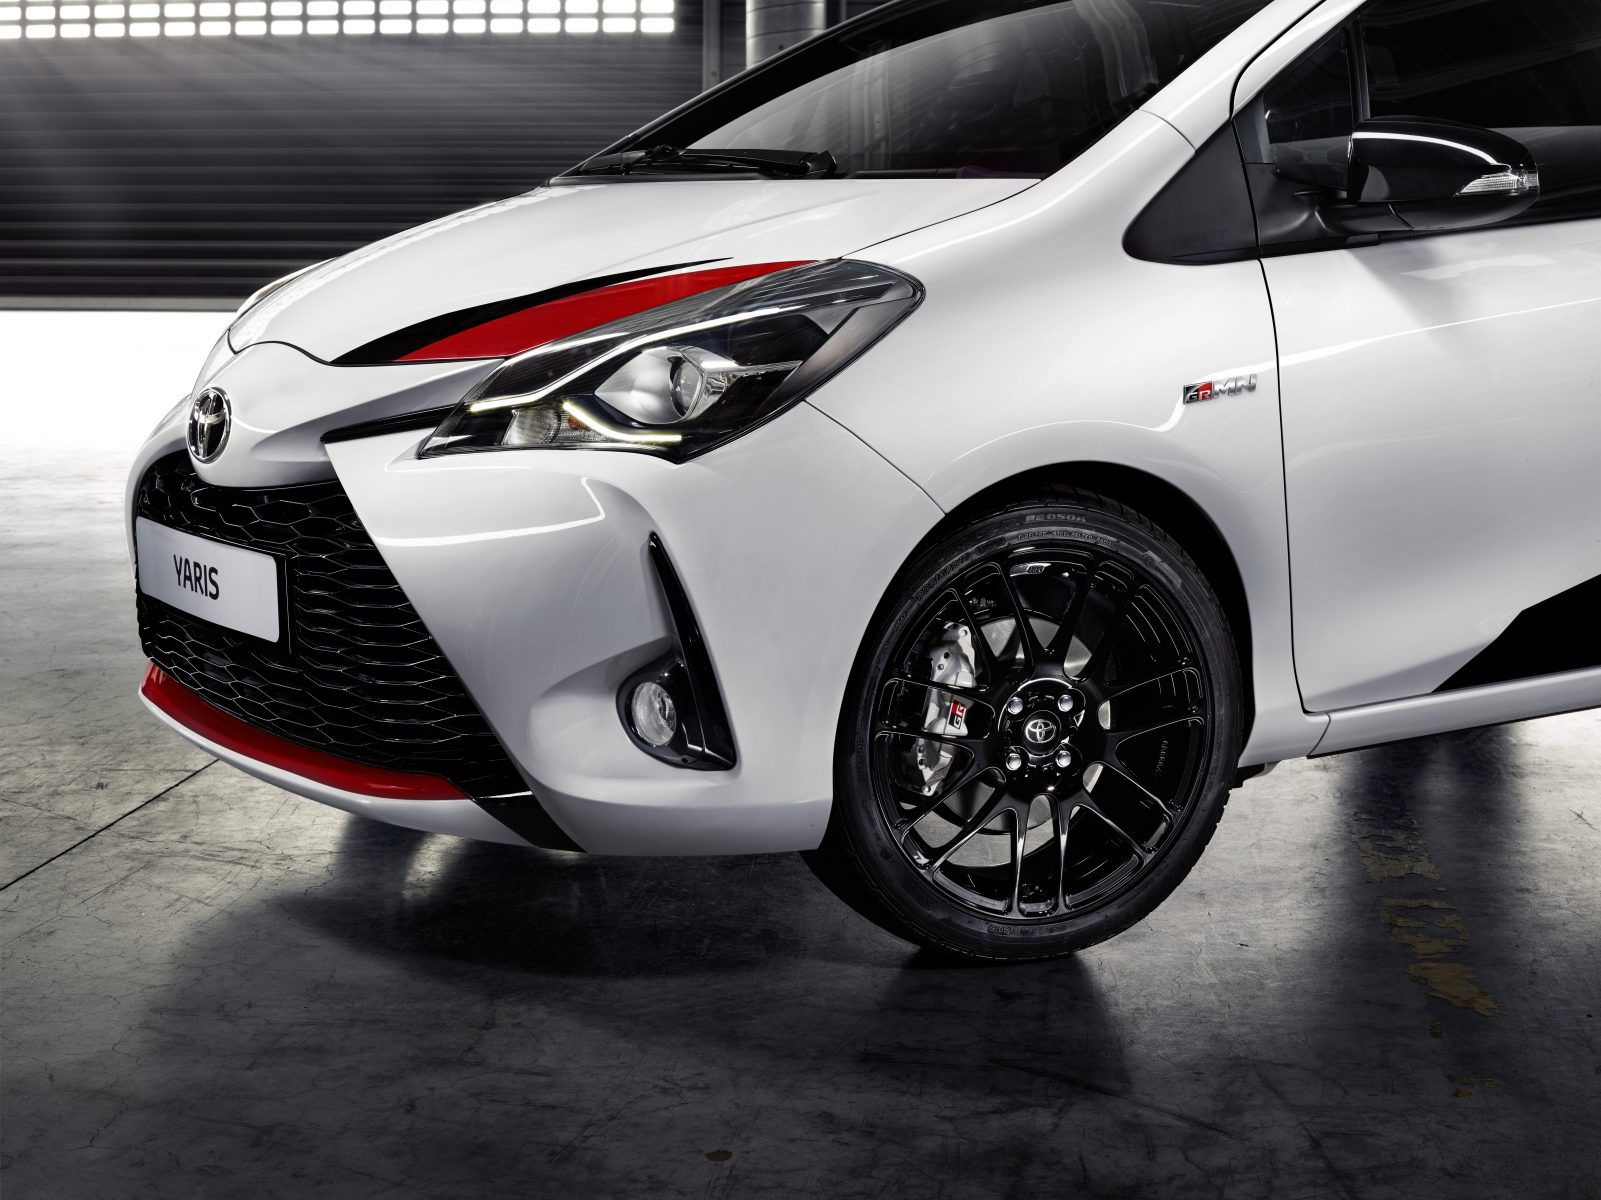 Front of a Toyota Yaris GRMN